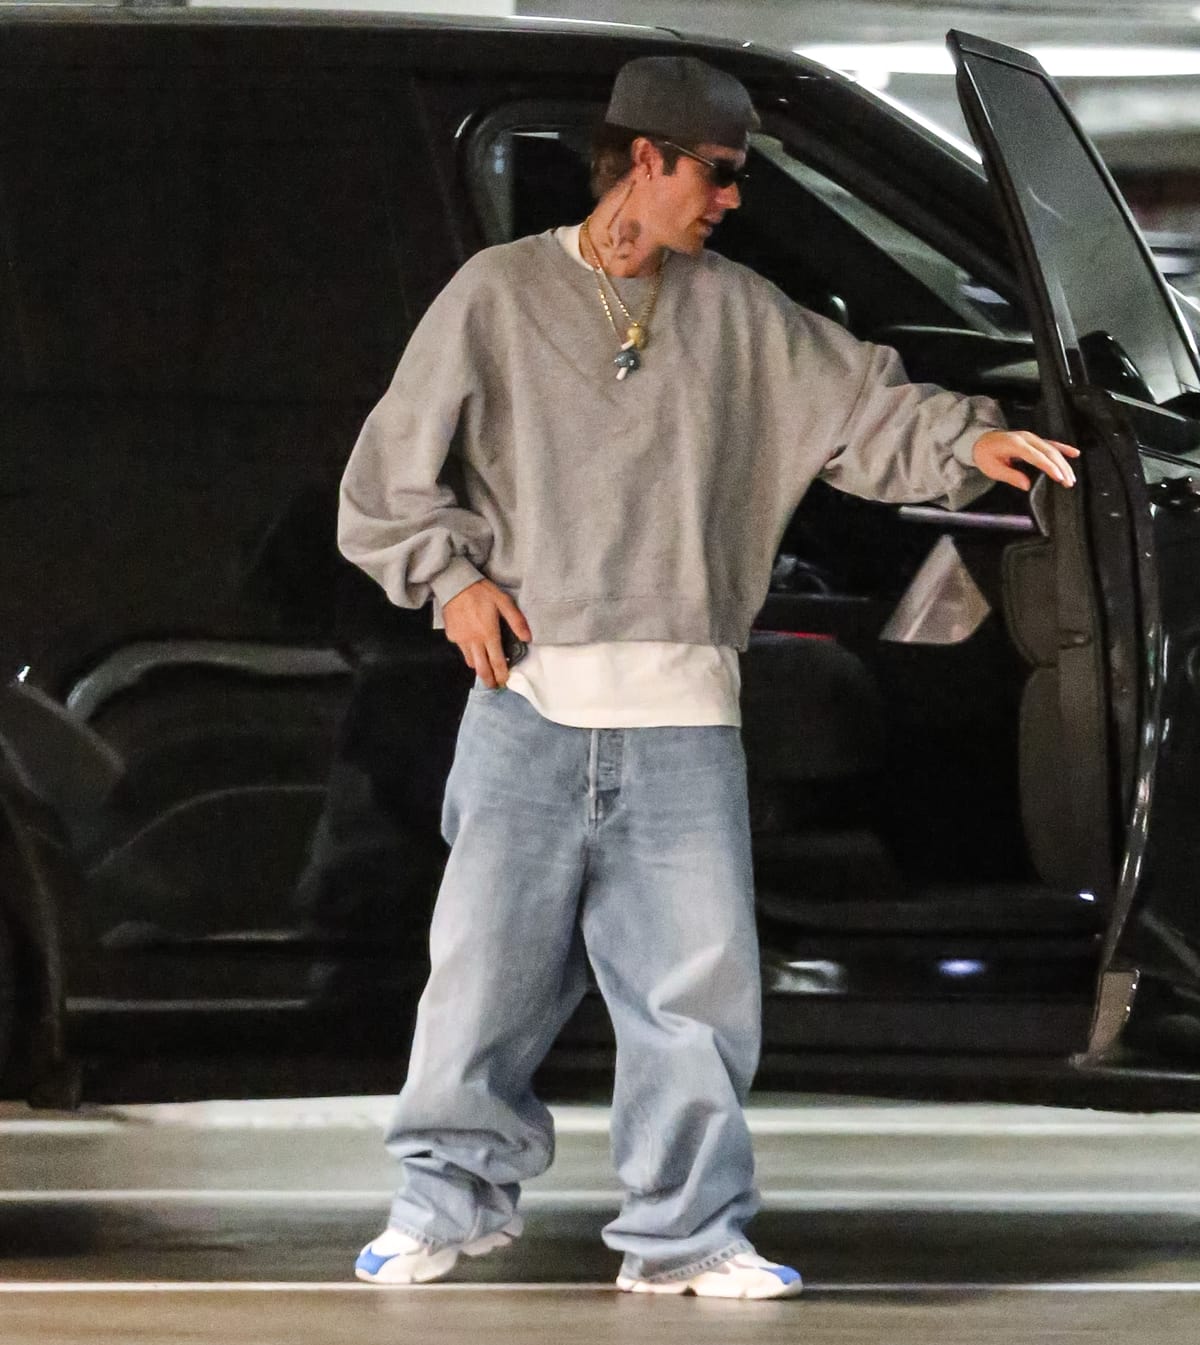 Justin Bieber pairs wide-legged jeans with a crisp white short-sleeved shirt, a casually draped grey sweatshirt, a black trucker hat, and trendy white and blue sneakers